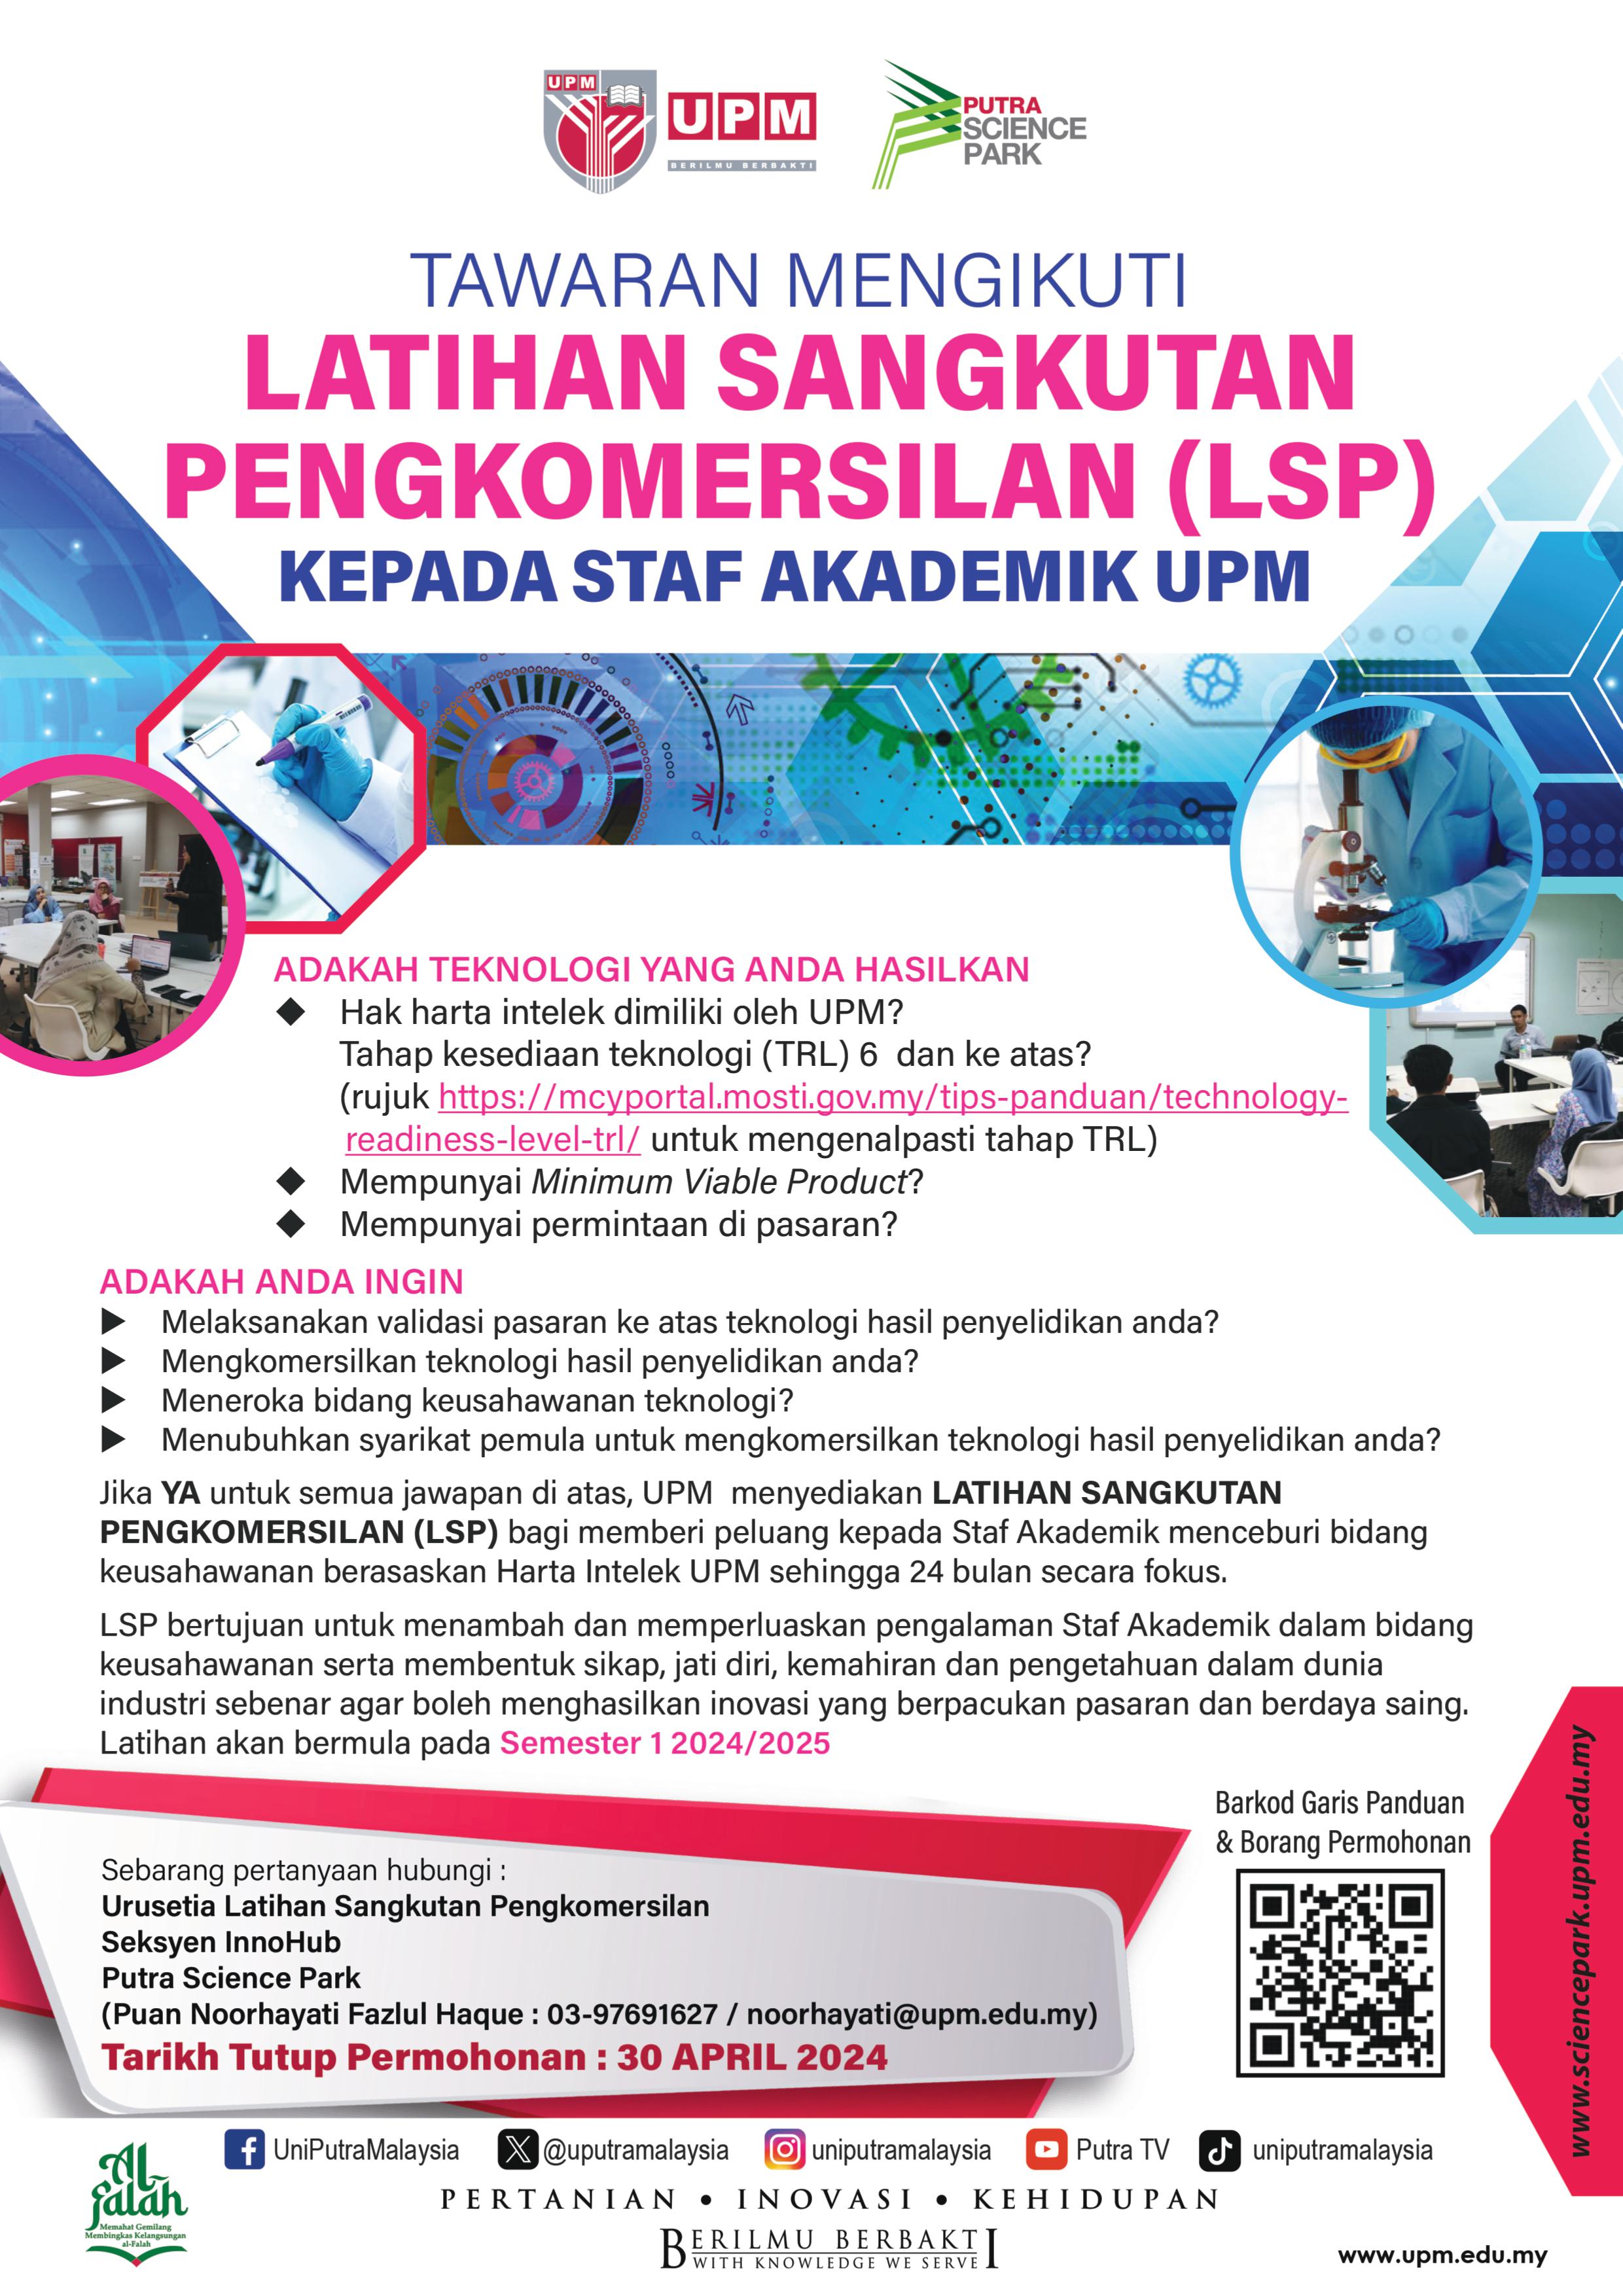 COMMERCIALIZATION ATTACHMENT TRAINING FOR ACADEMICIAN : OPEN FOR APPLICATION